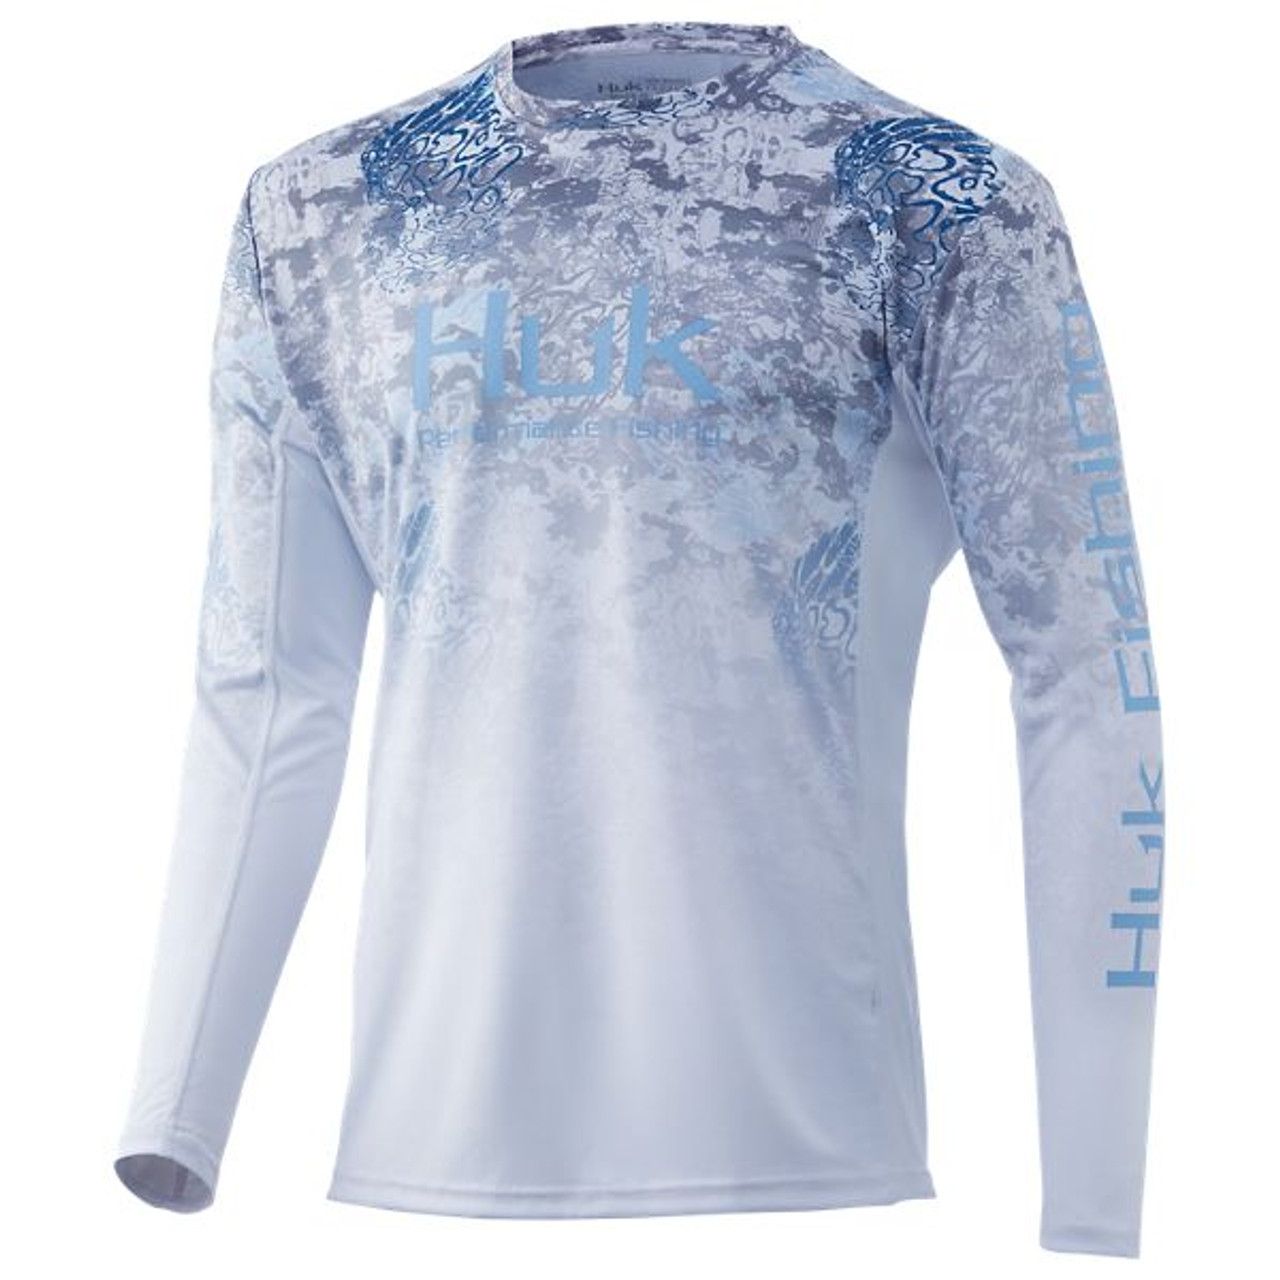 Huk Men's Outfitter Pursuit Long Sleeve - Ice Blue - Small